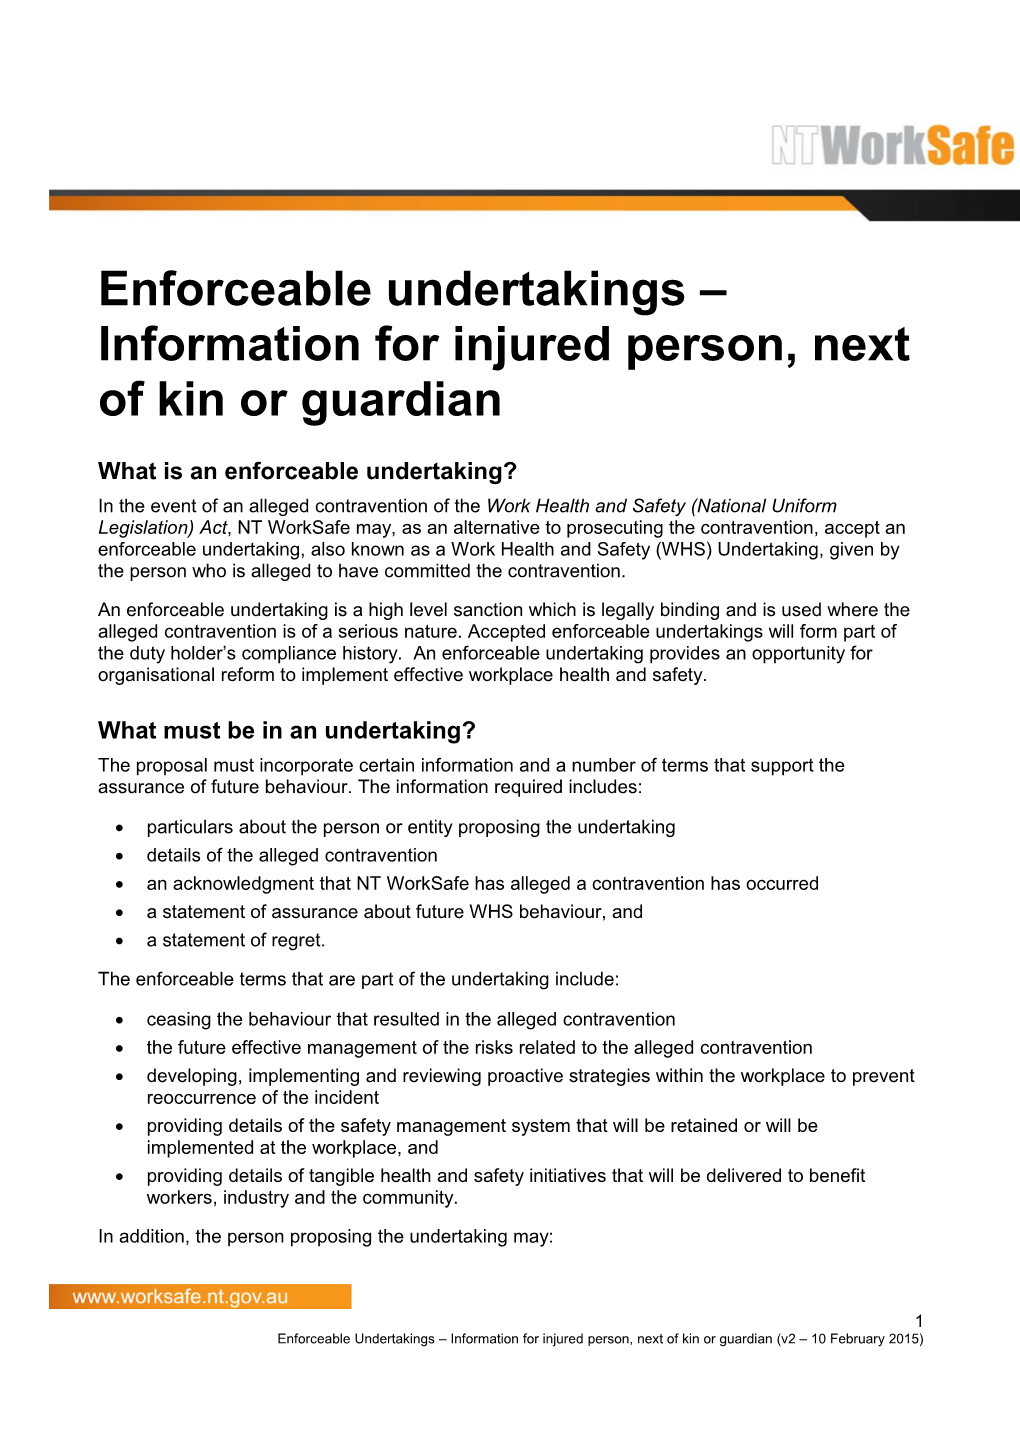 Enforceable Undertakings - Information for Injured Person's Next-Of-Kin Or Guardian